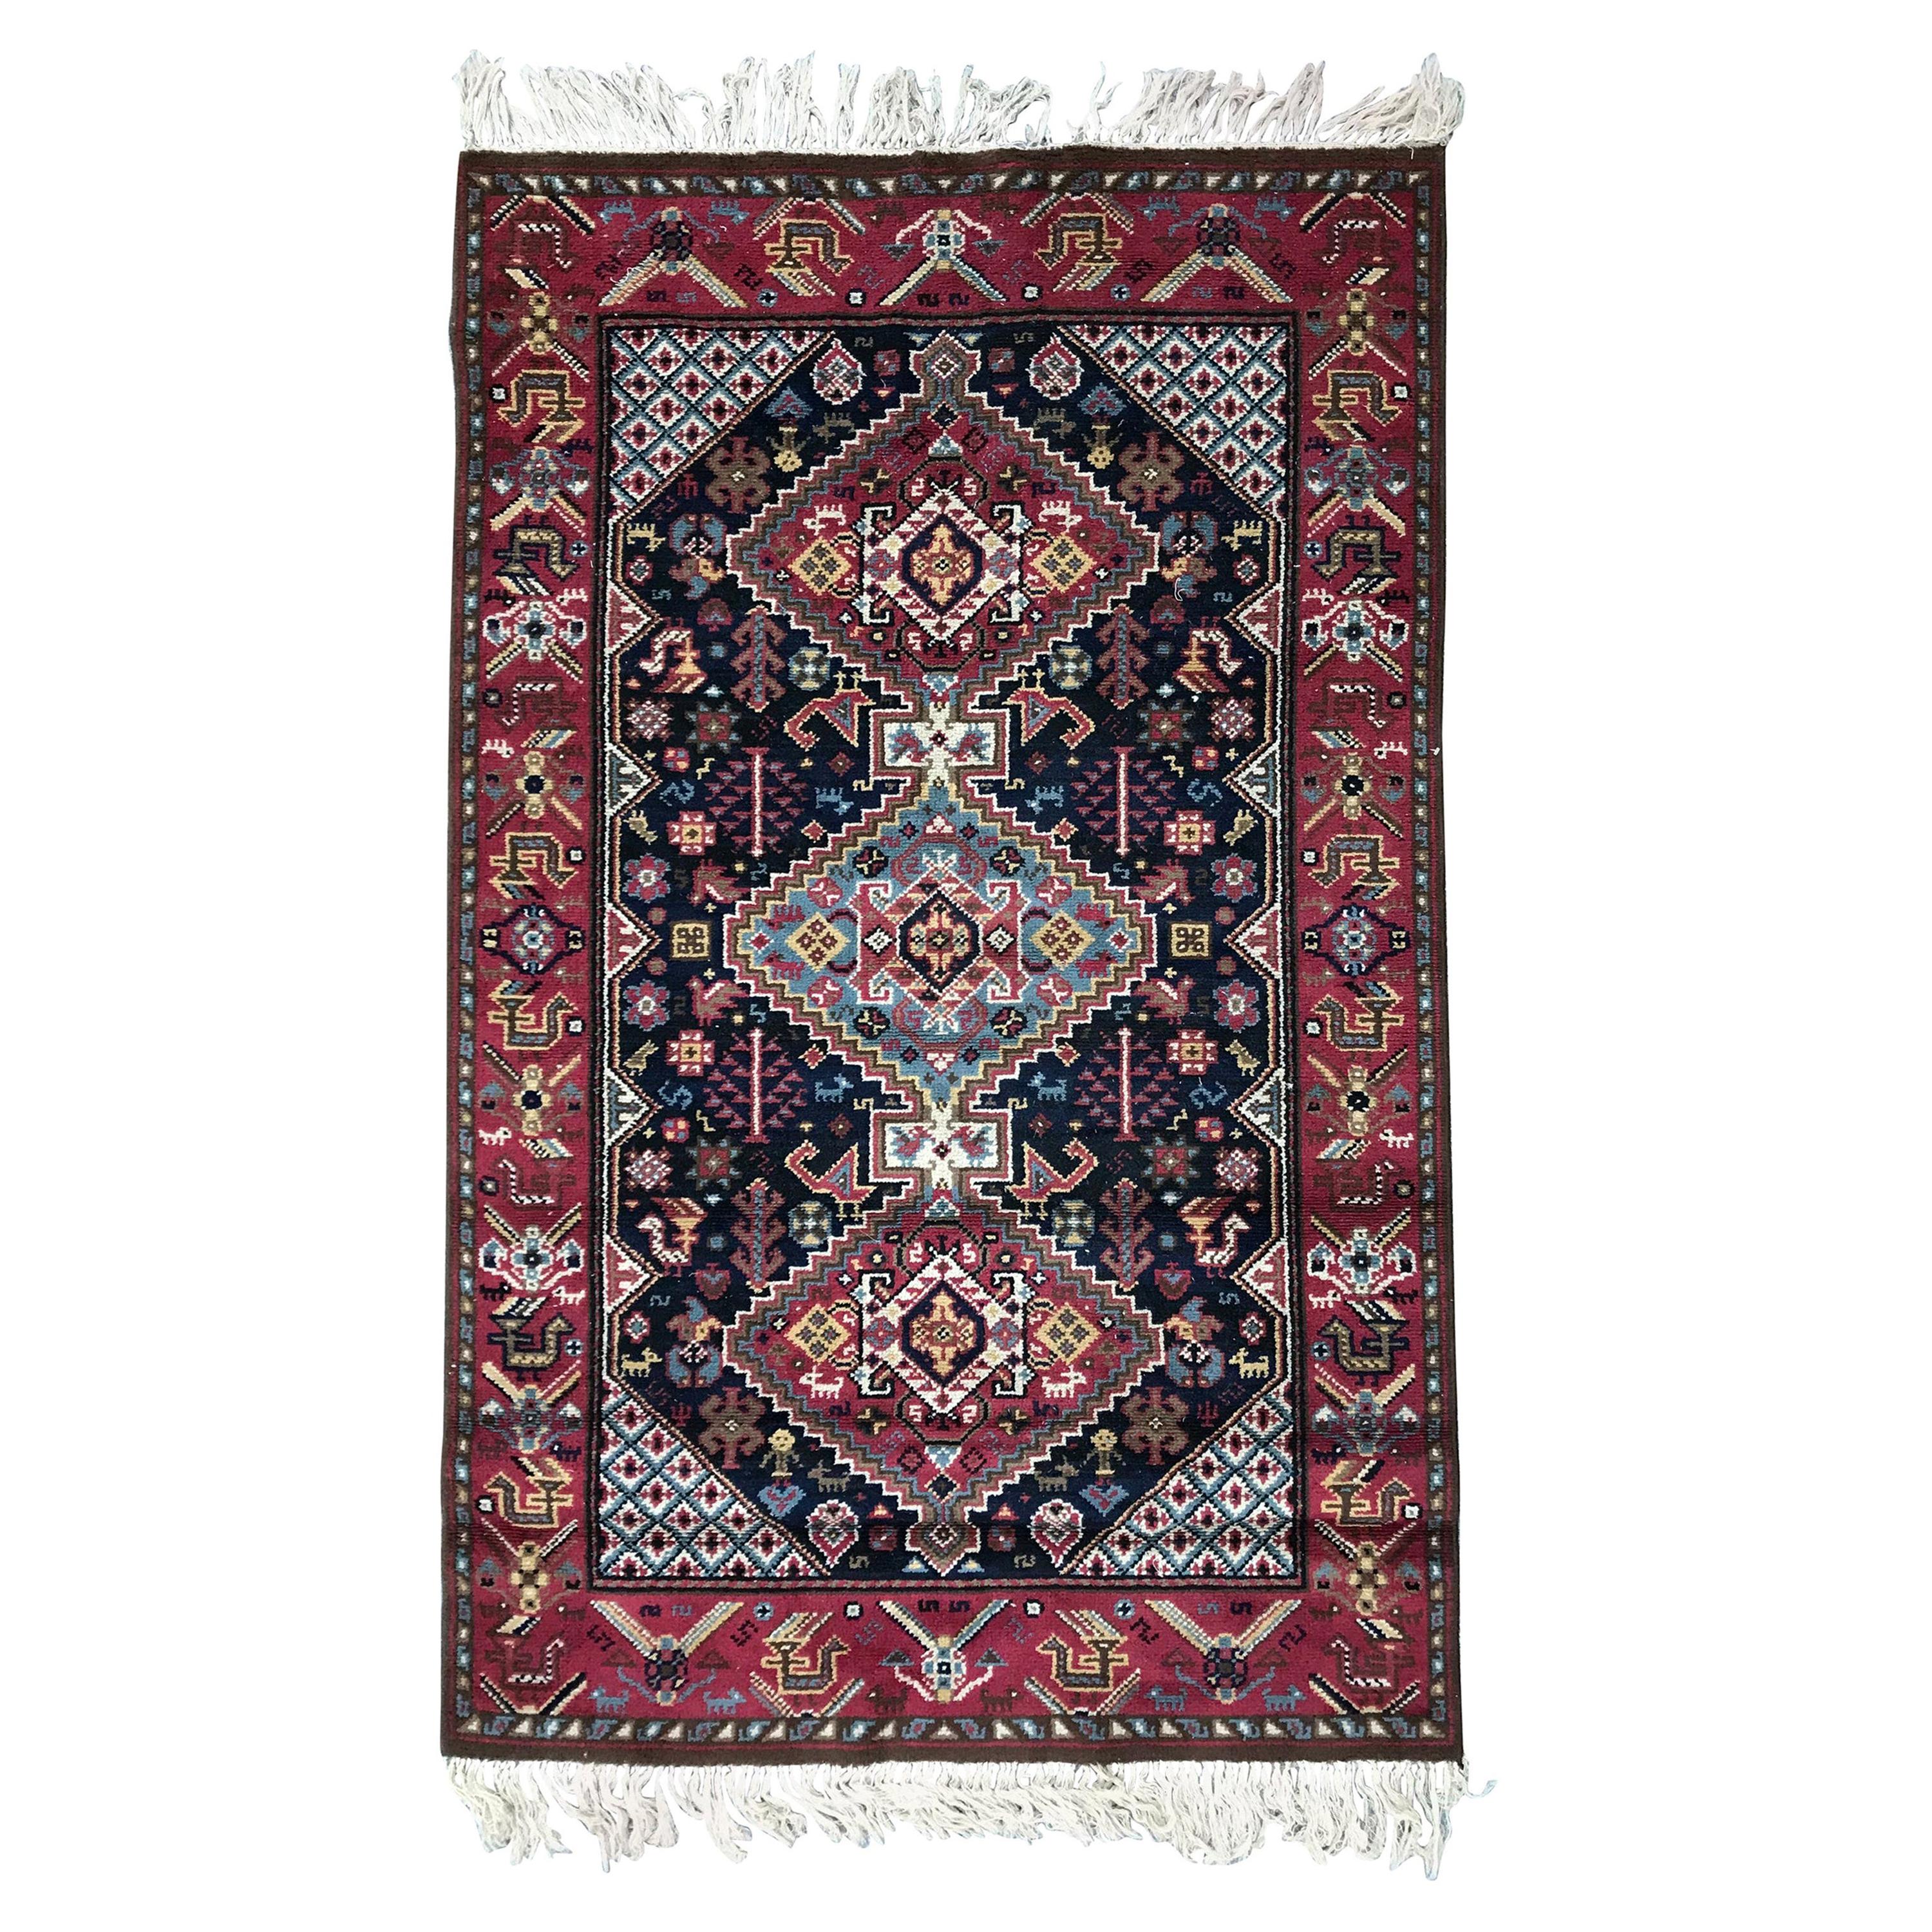 Bobyrug’s Beautiful Vintage French Shiraz Design Knotted Rug For Sale